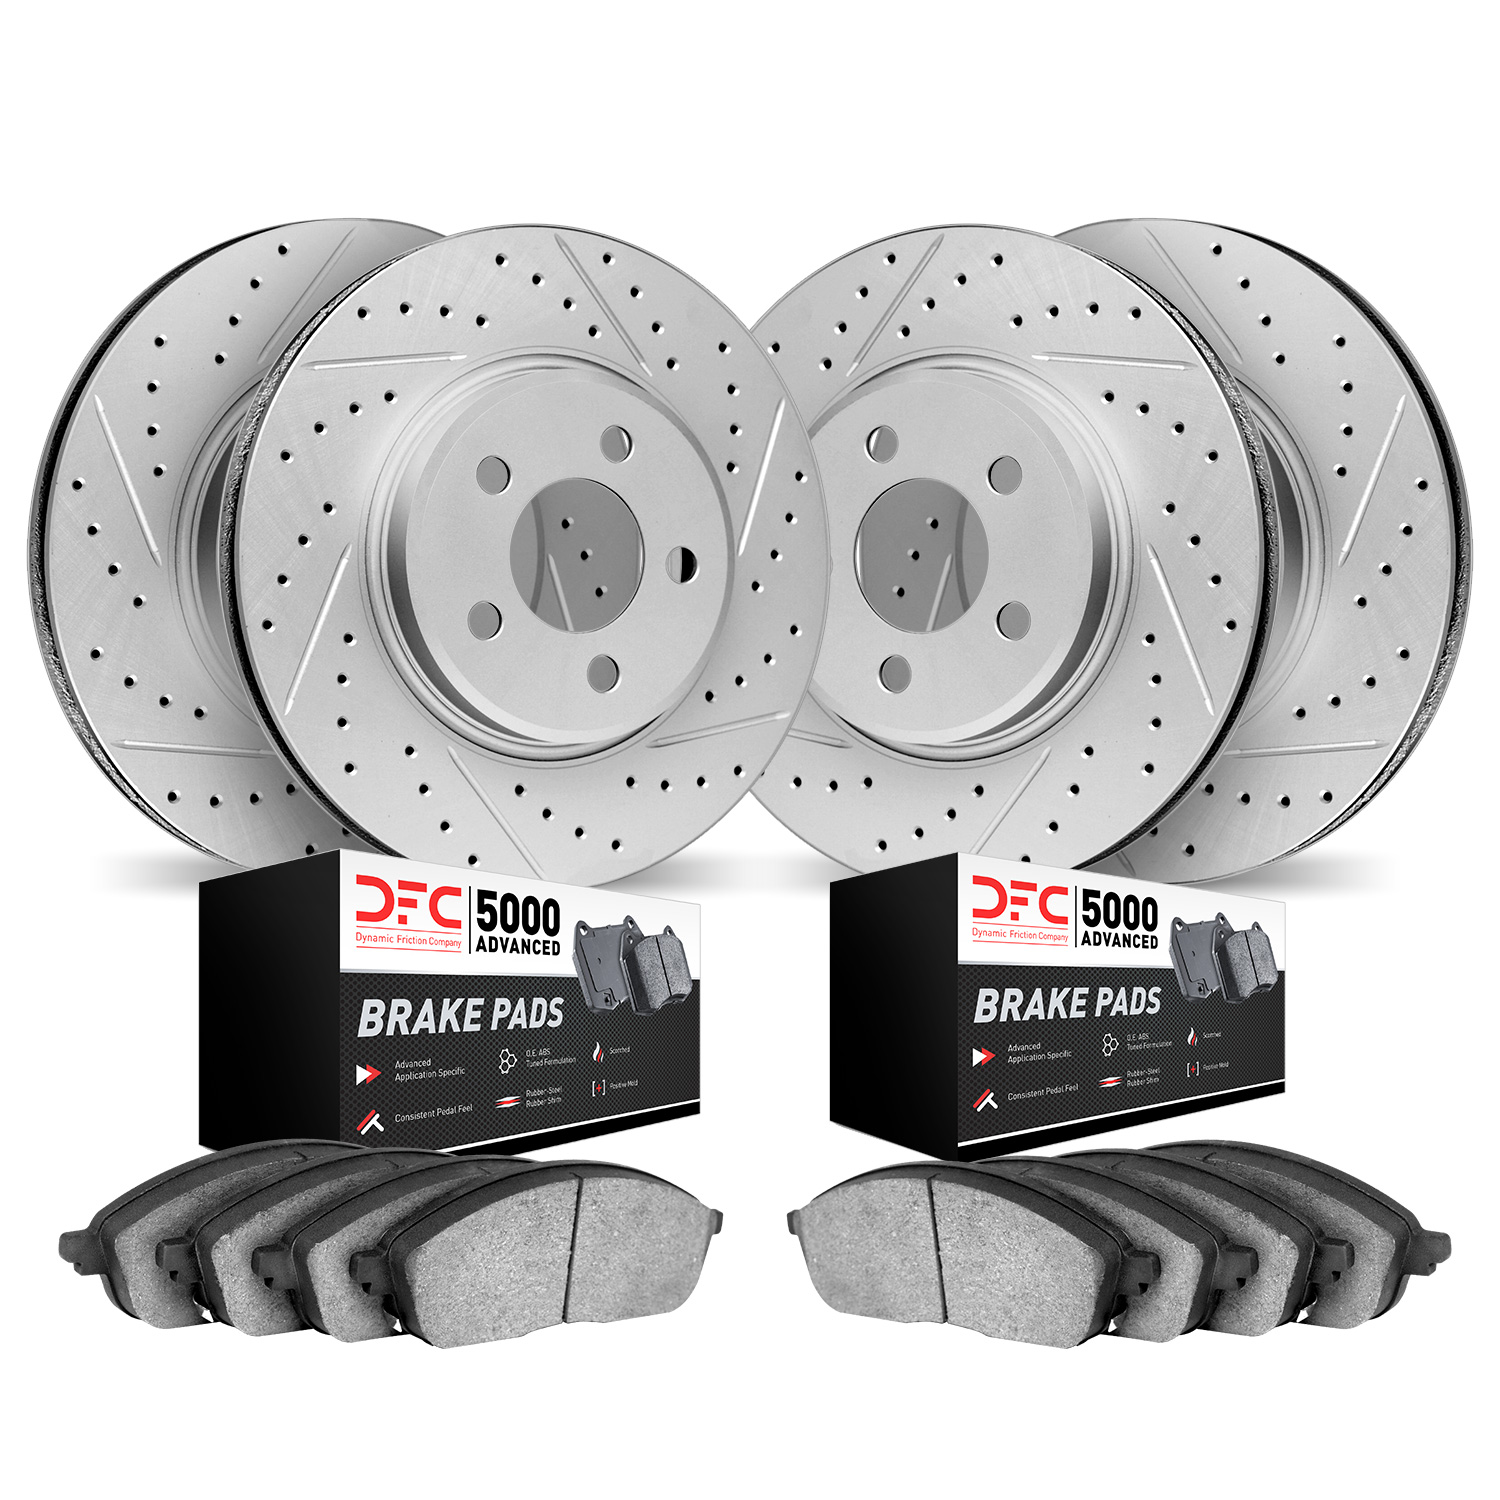 2504-68010 Geoperformance Drilled/Slotted Rotors w/5000 Advanced Brake Pads Kit, Fits Select Infiniti/Nissan, Position: Front an